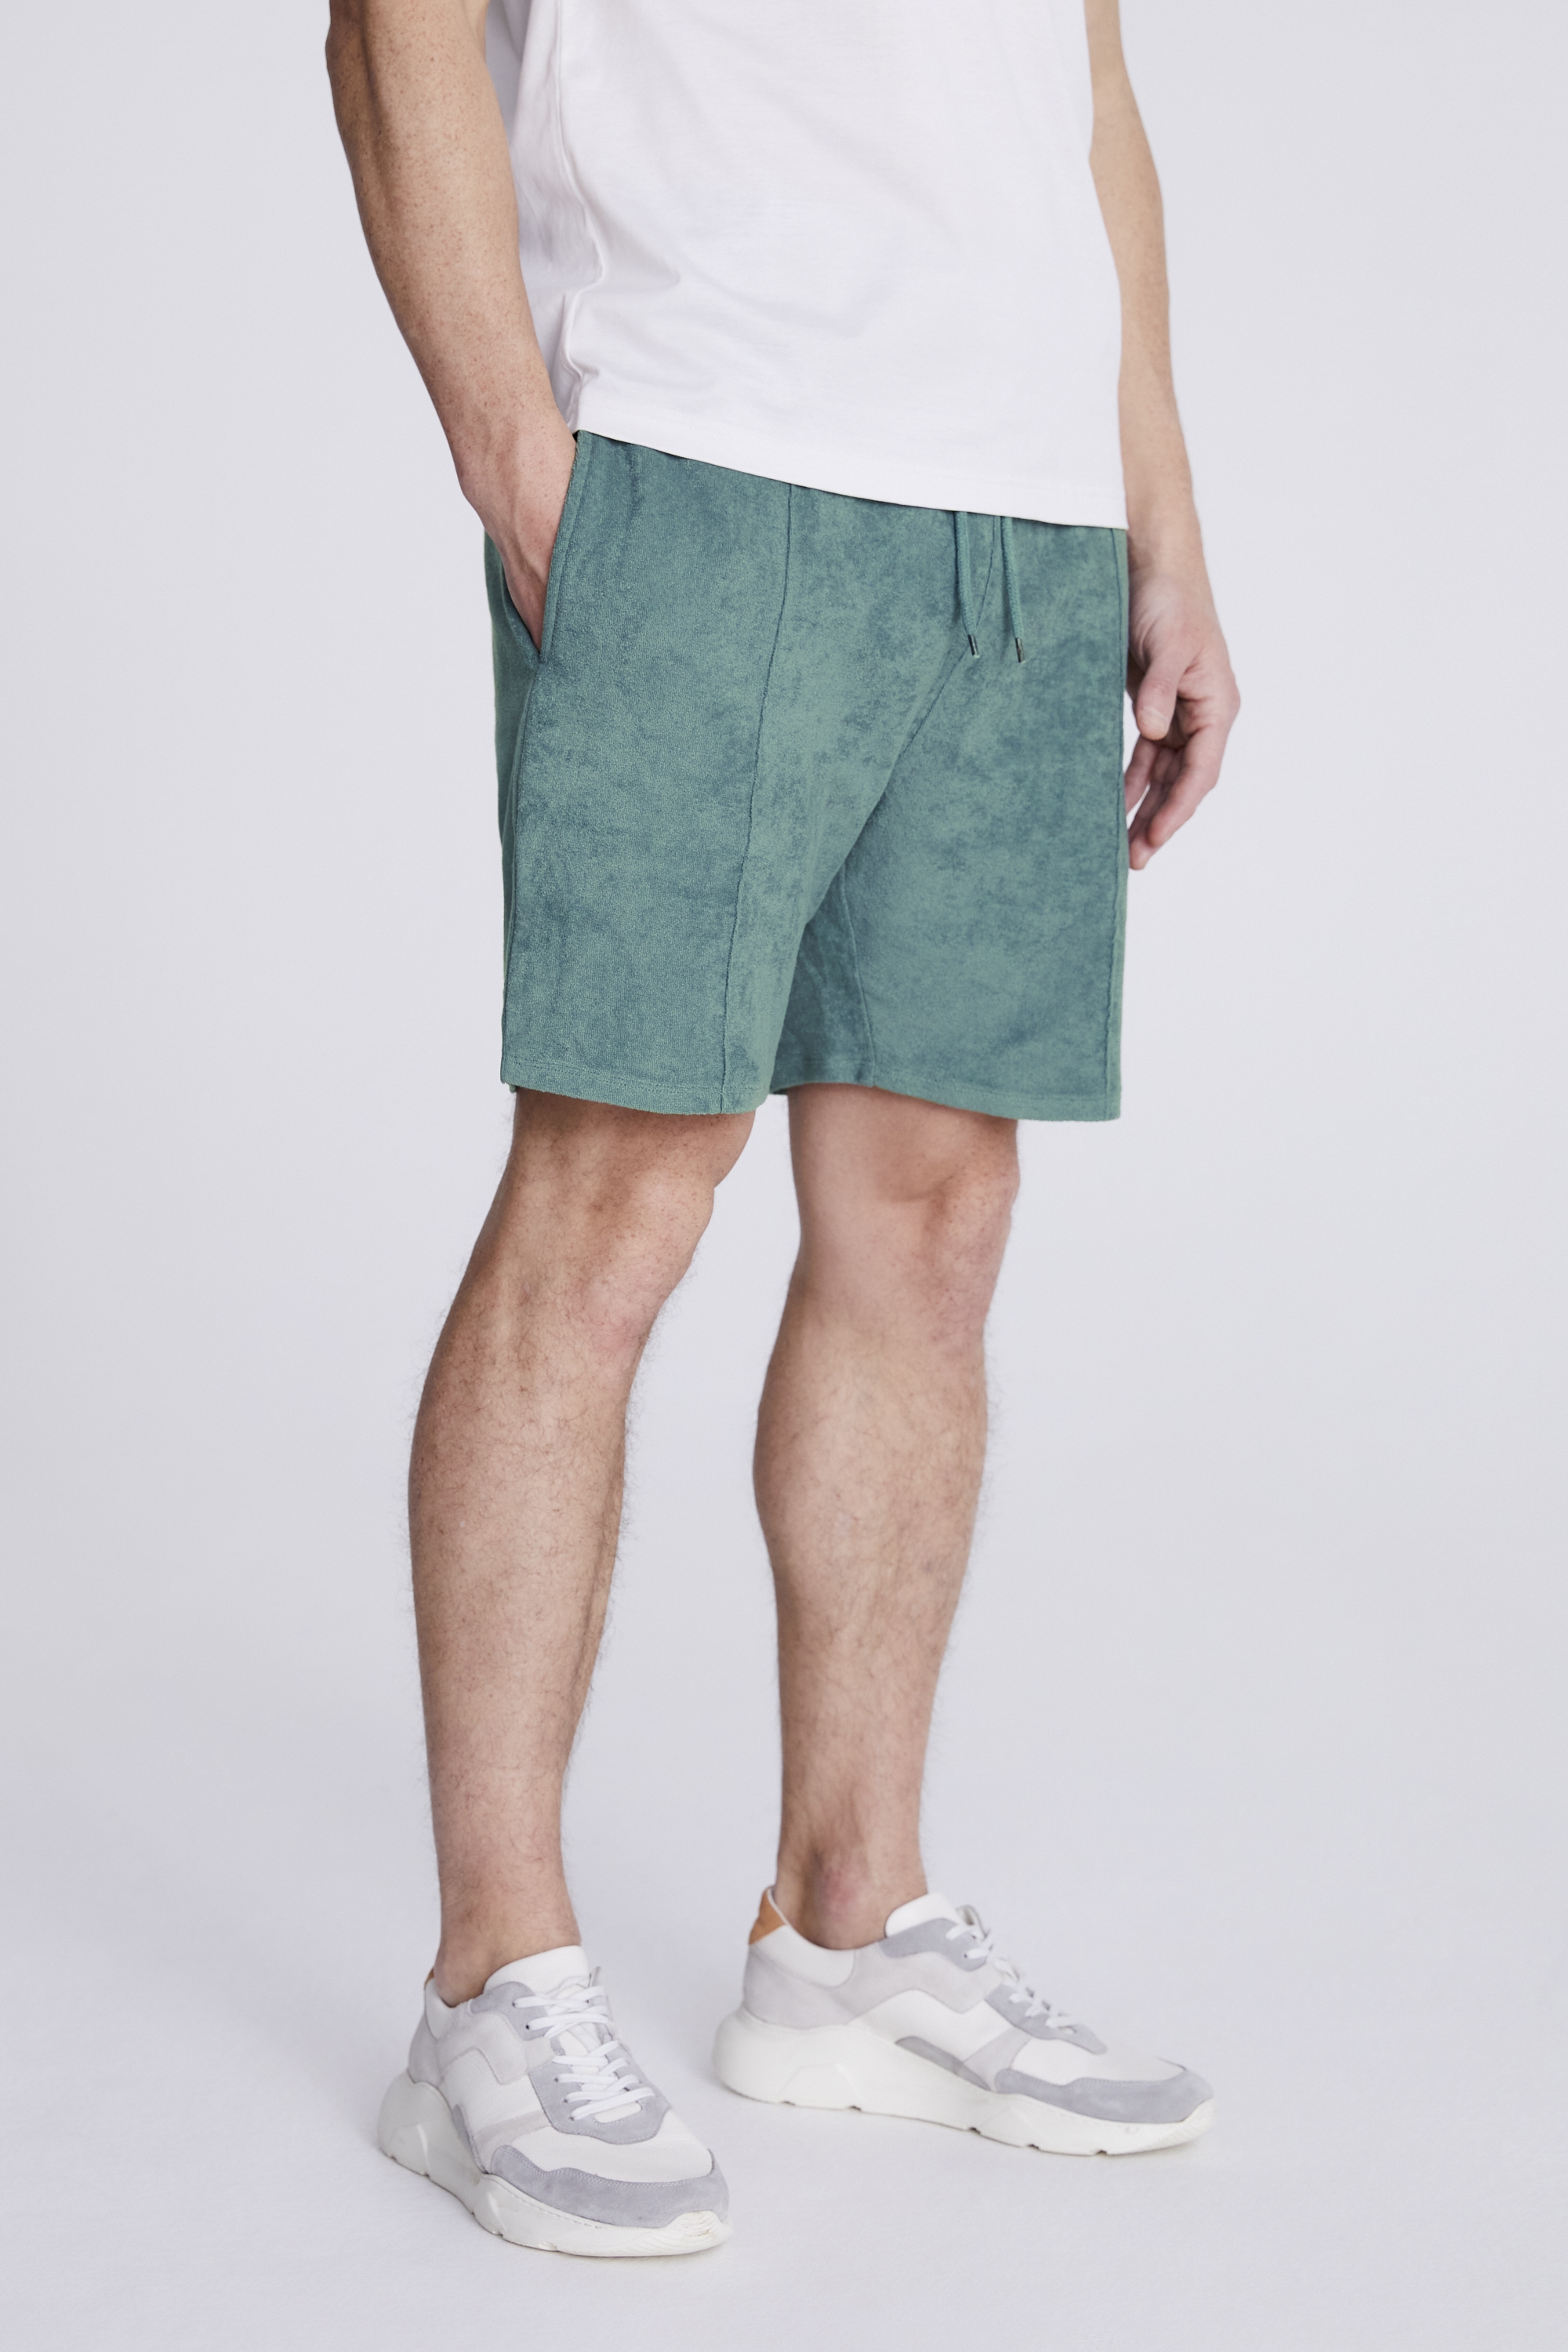 Sage Terry Towelling Shorts | Buy Online at Moss